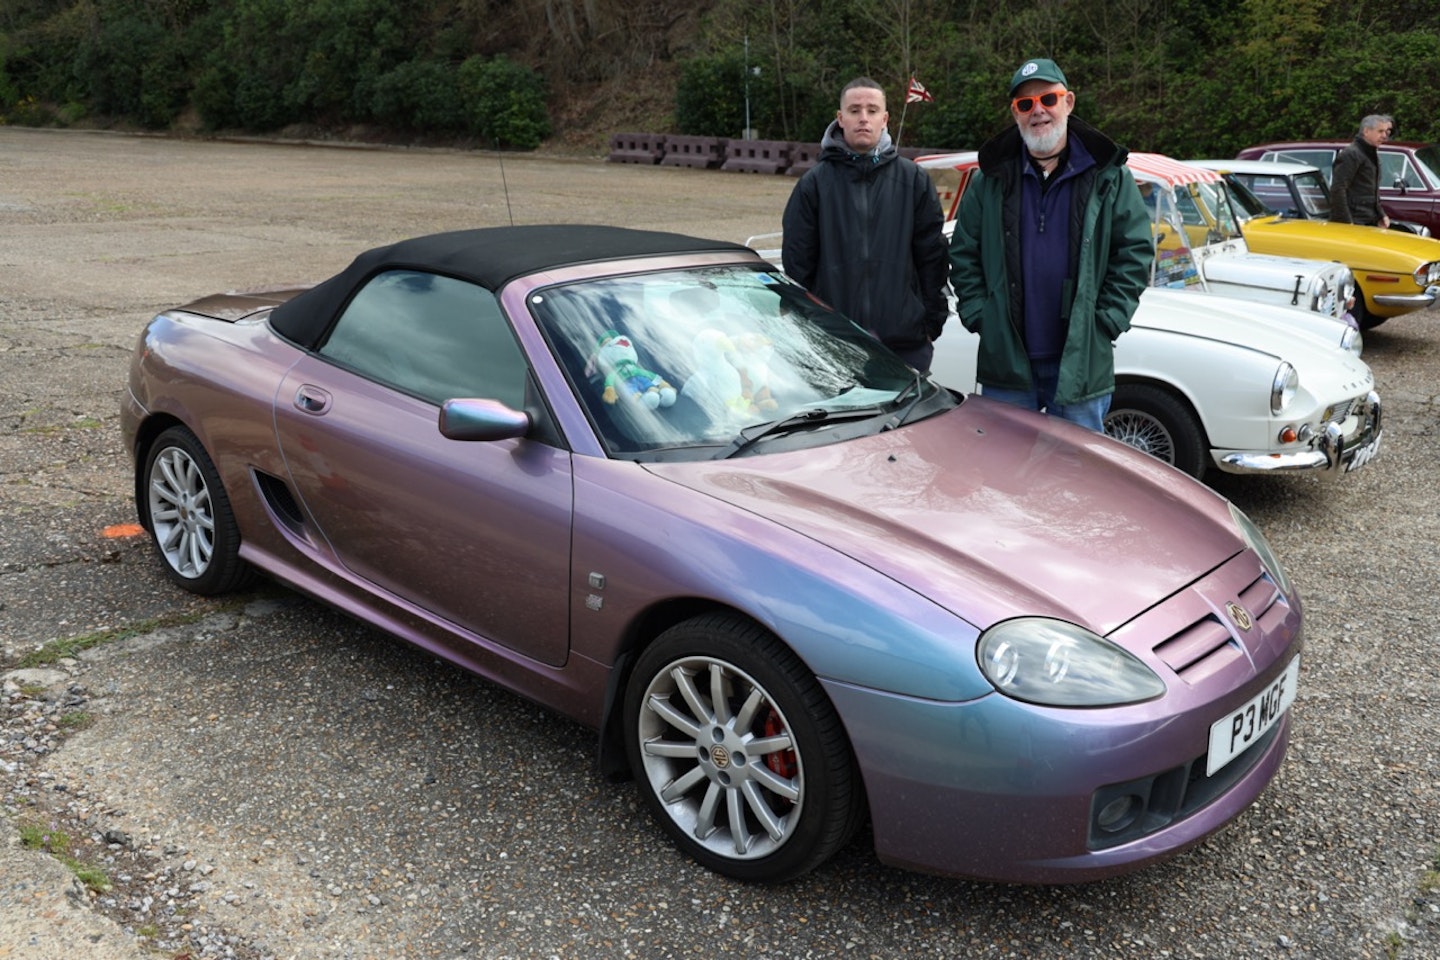 As a local MG group member, Brooklands was an obvious DID location for Gerry Edwards, seen here with his 2004 MG TF and son Jack Edwards.